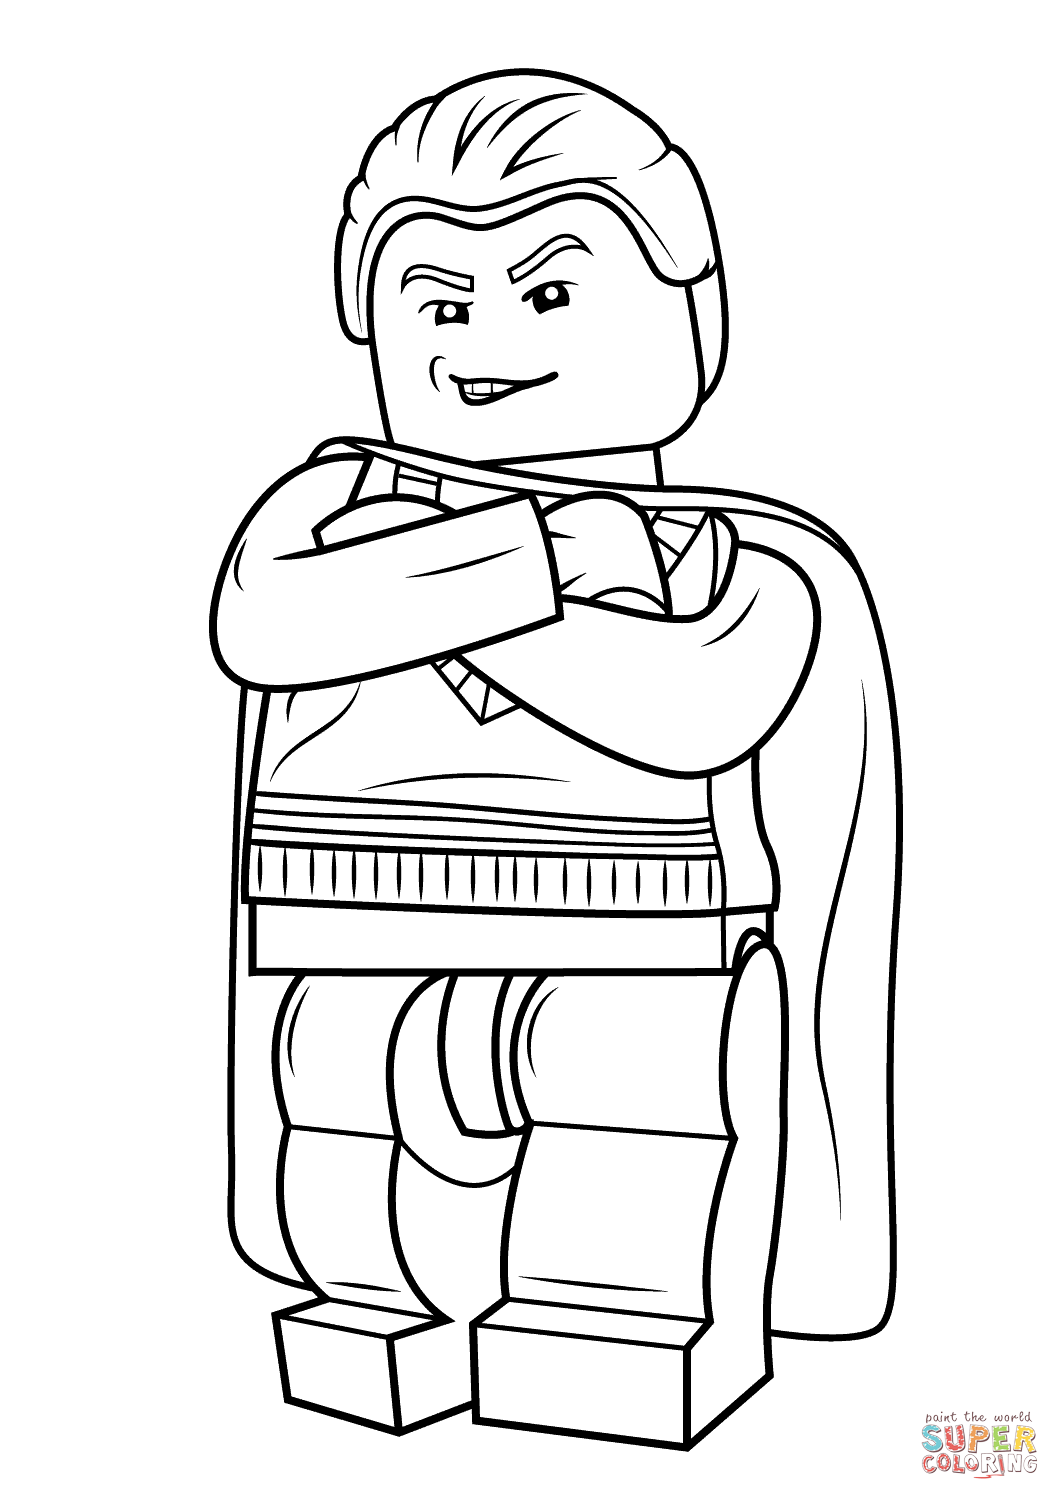 Lego Draco Malfoy coloring page